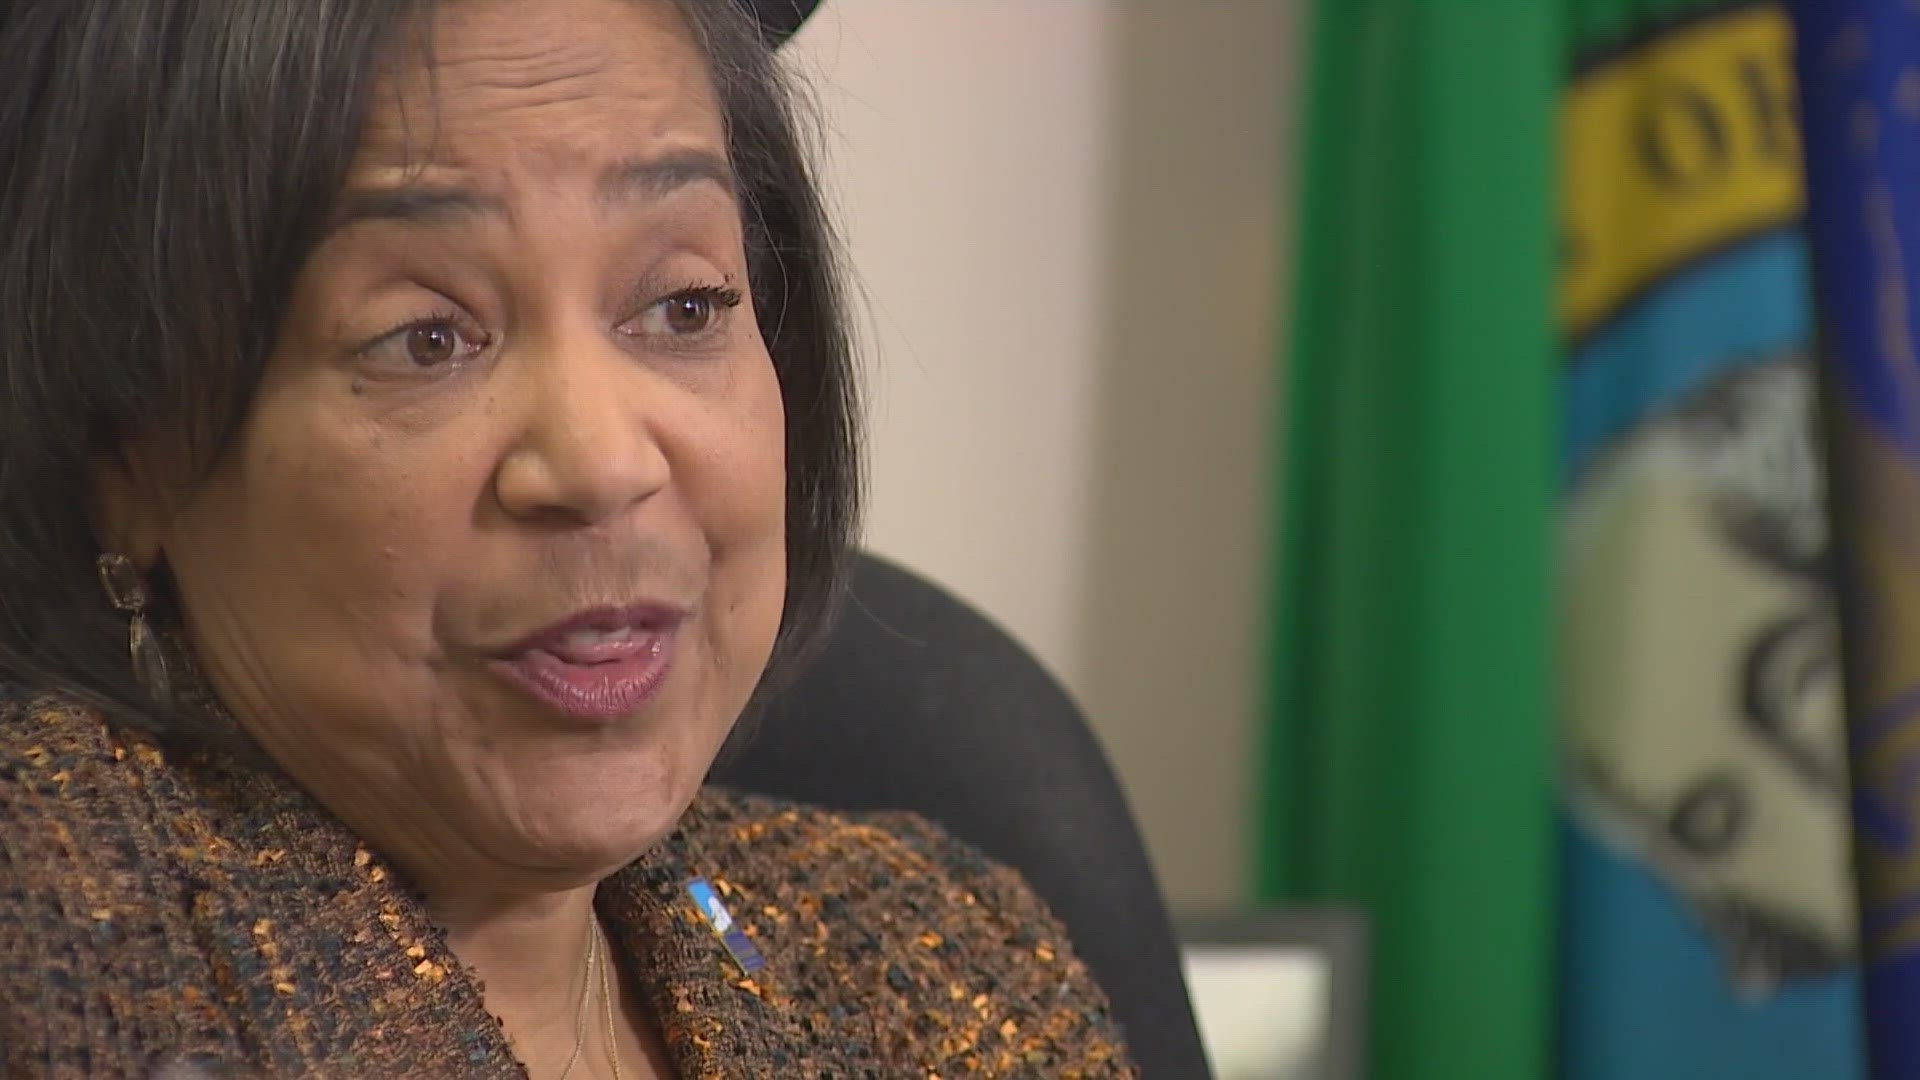 “I’m still so honored to do this job,” Mayor Woodards said. She discussed her time guiding Tacoma through some difficult times and her plans for the city’s future.